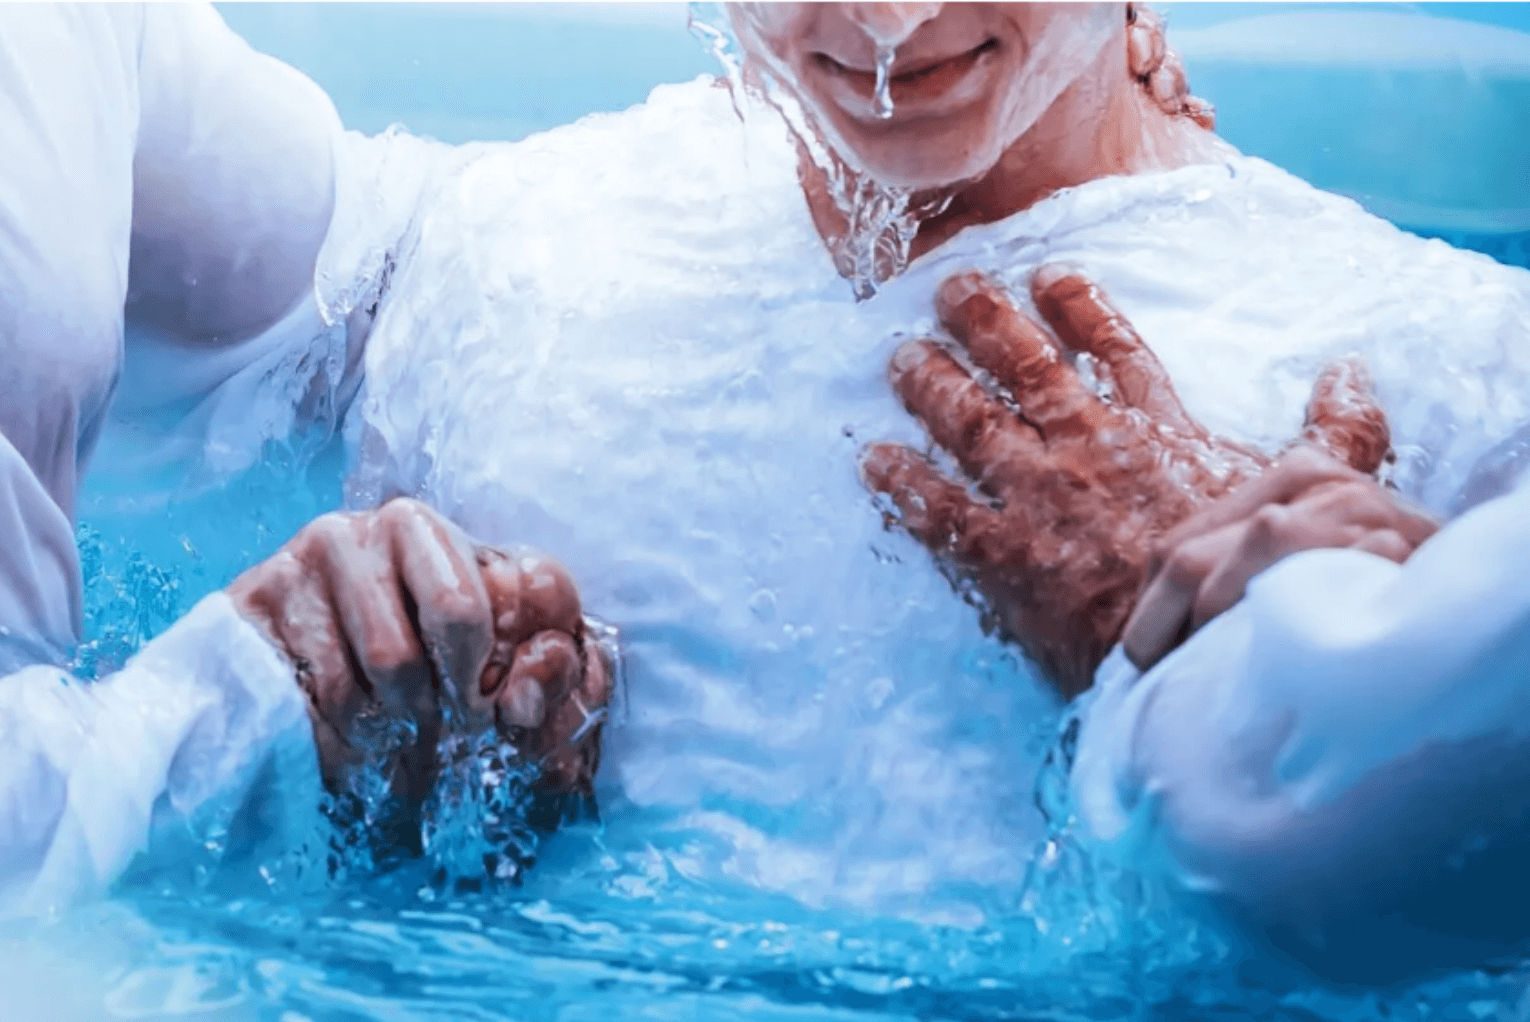 12,000 Souls Baptized Reporting ‘a Personal Encounter with Christ’